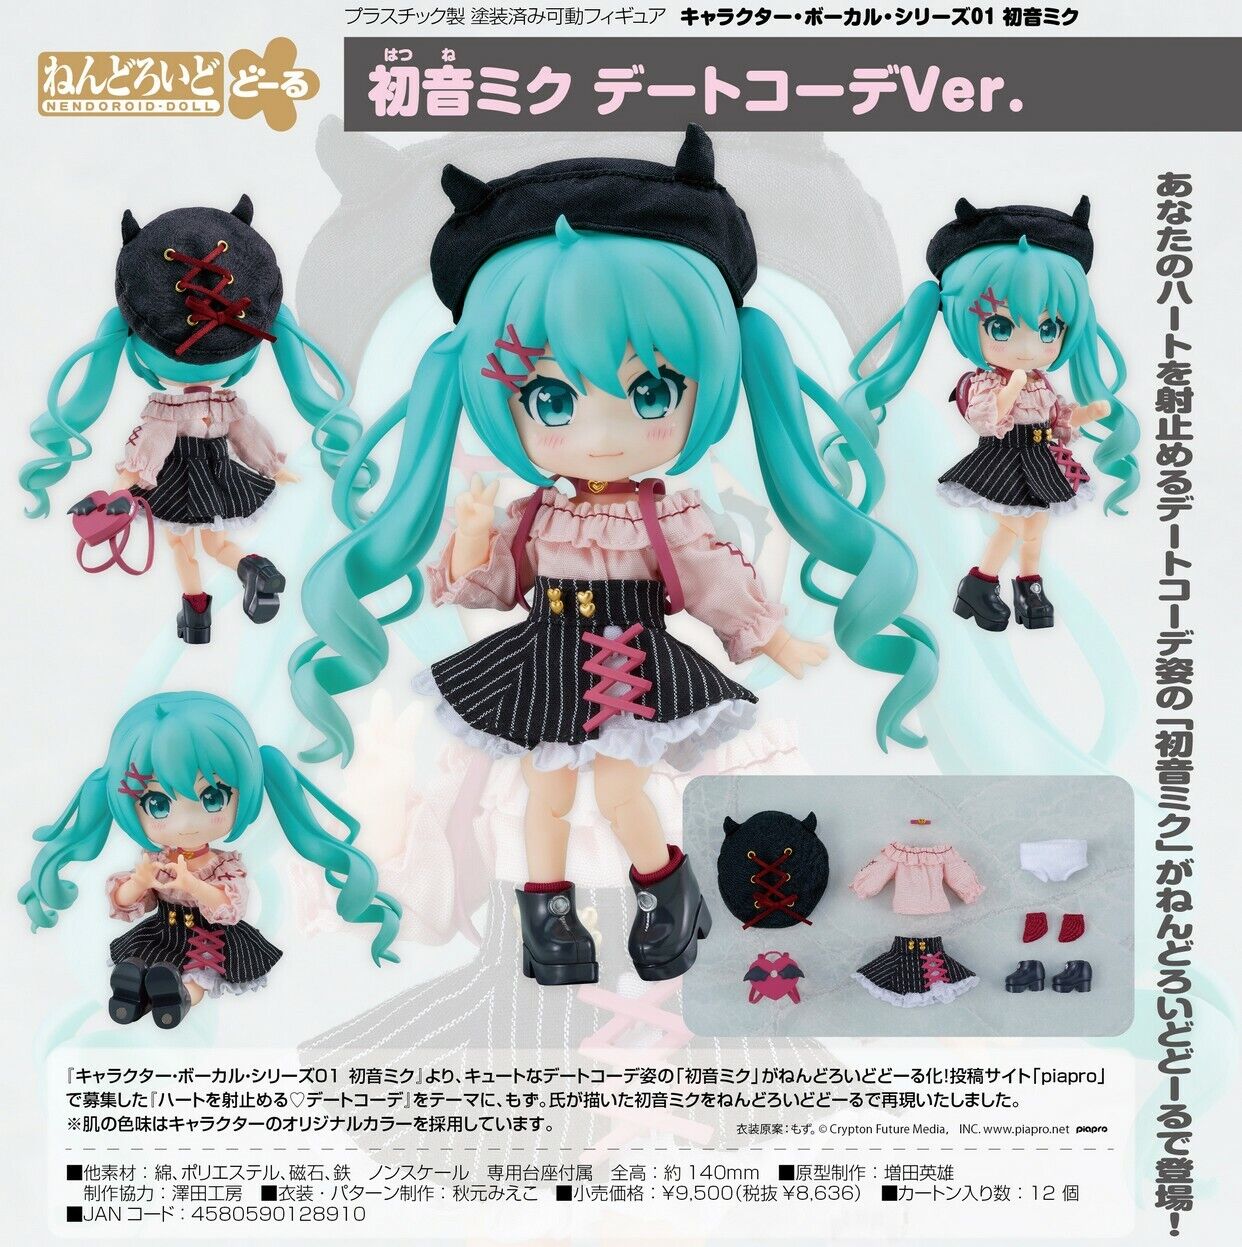 naturpark logo Mansion NEW AUTHENTIC Good Smile Nendoroid Doll Hatsune Miku Date Outfit Figure  Preorder | eBay